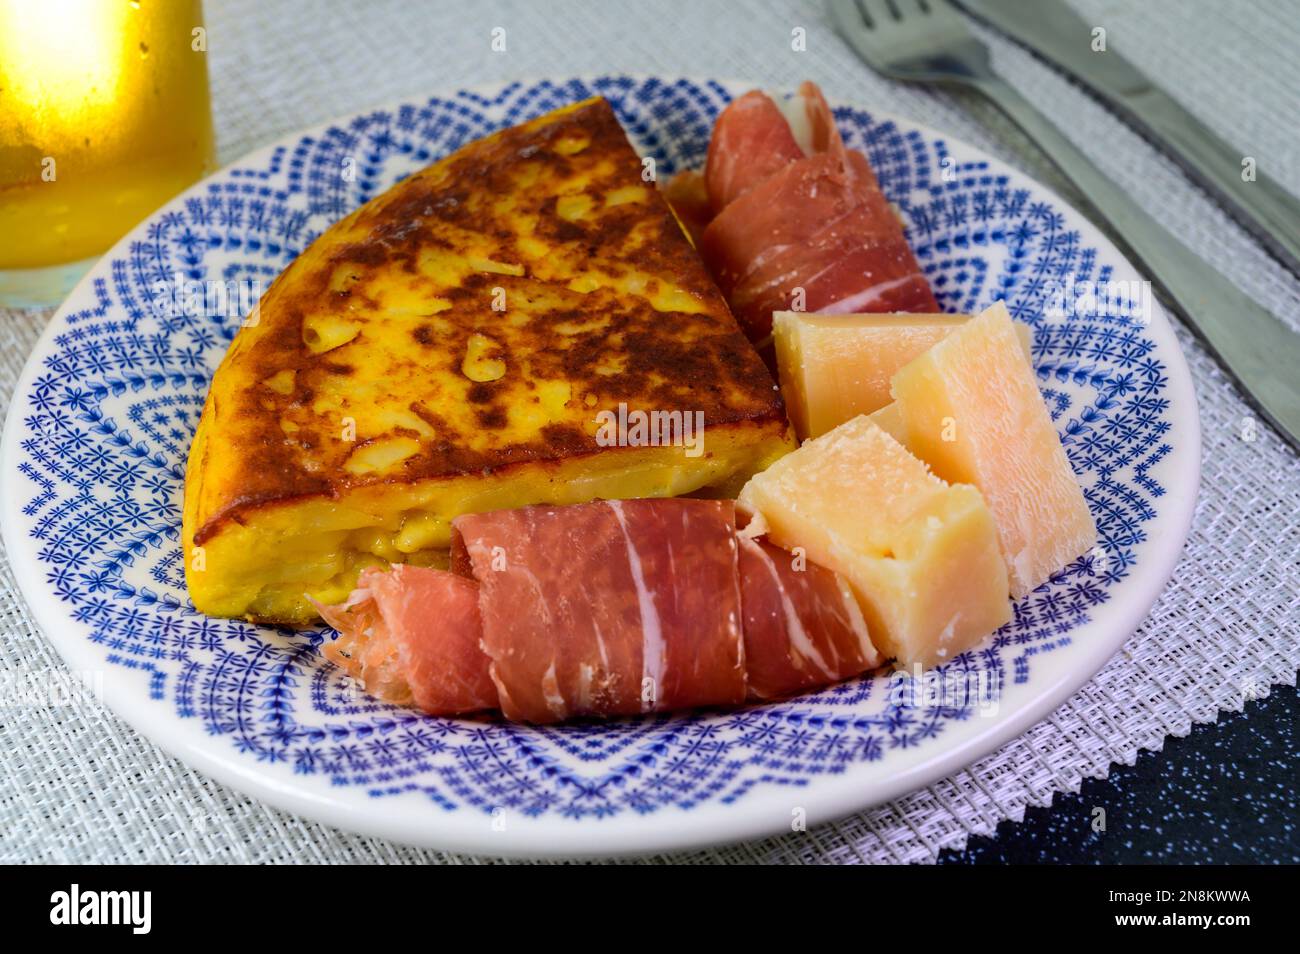 Spanish food, portion of potato omelette tortilla de patatas with onion served with cheese and jamon in cafe Stock Photo